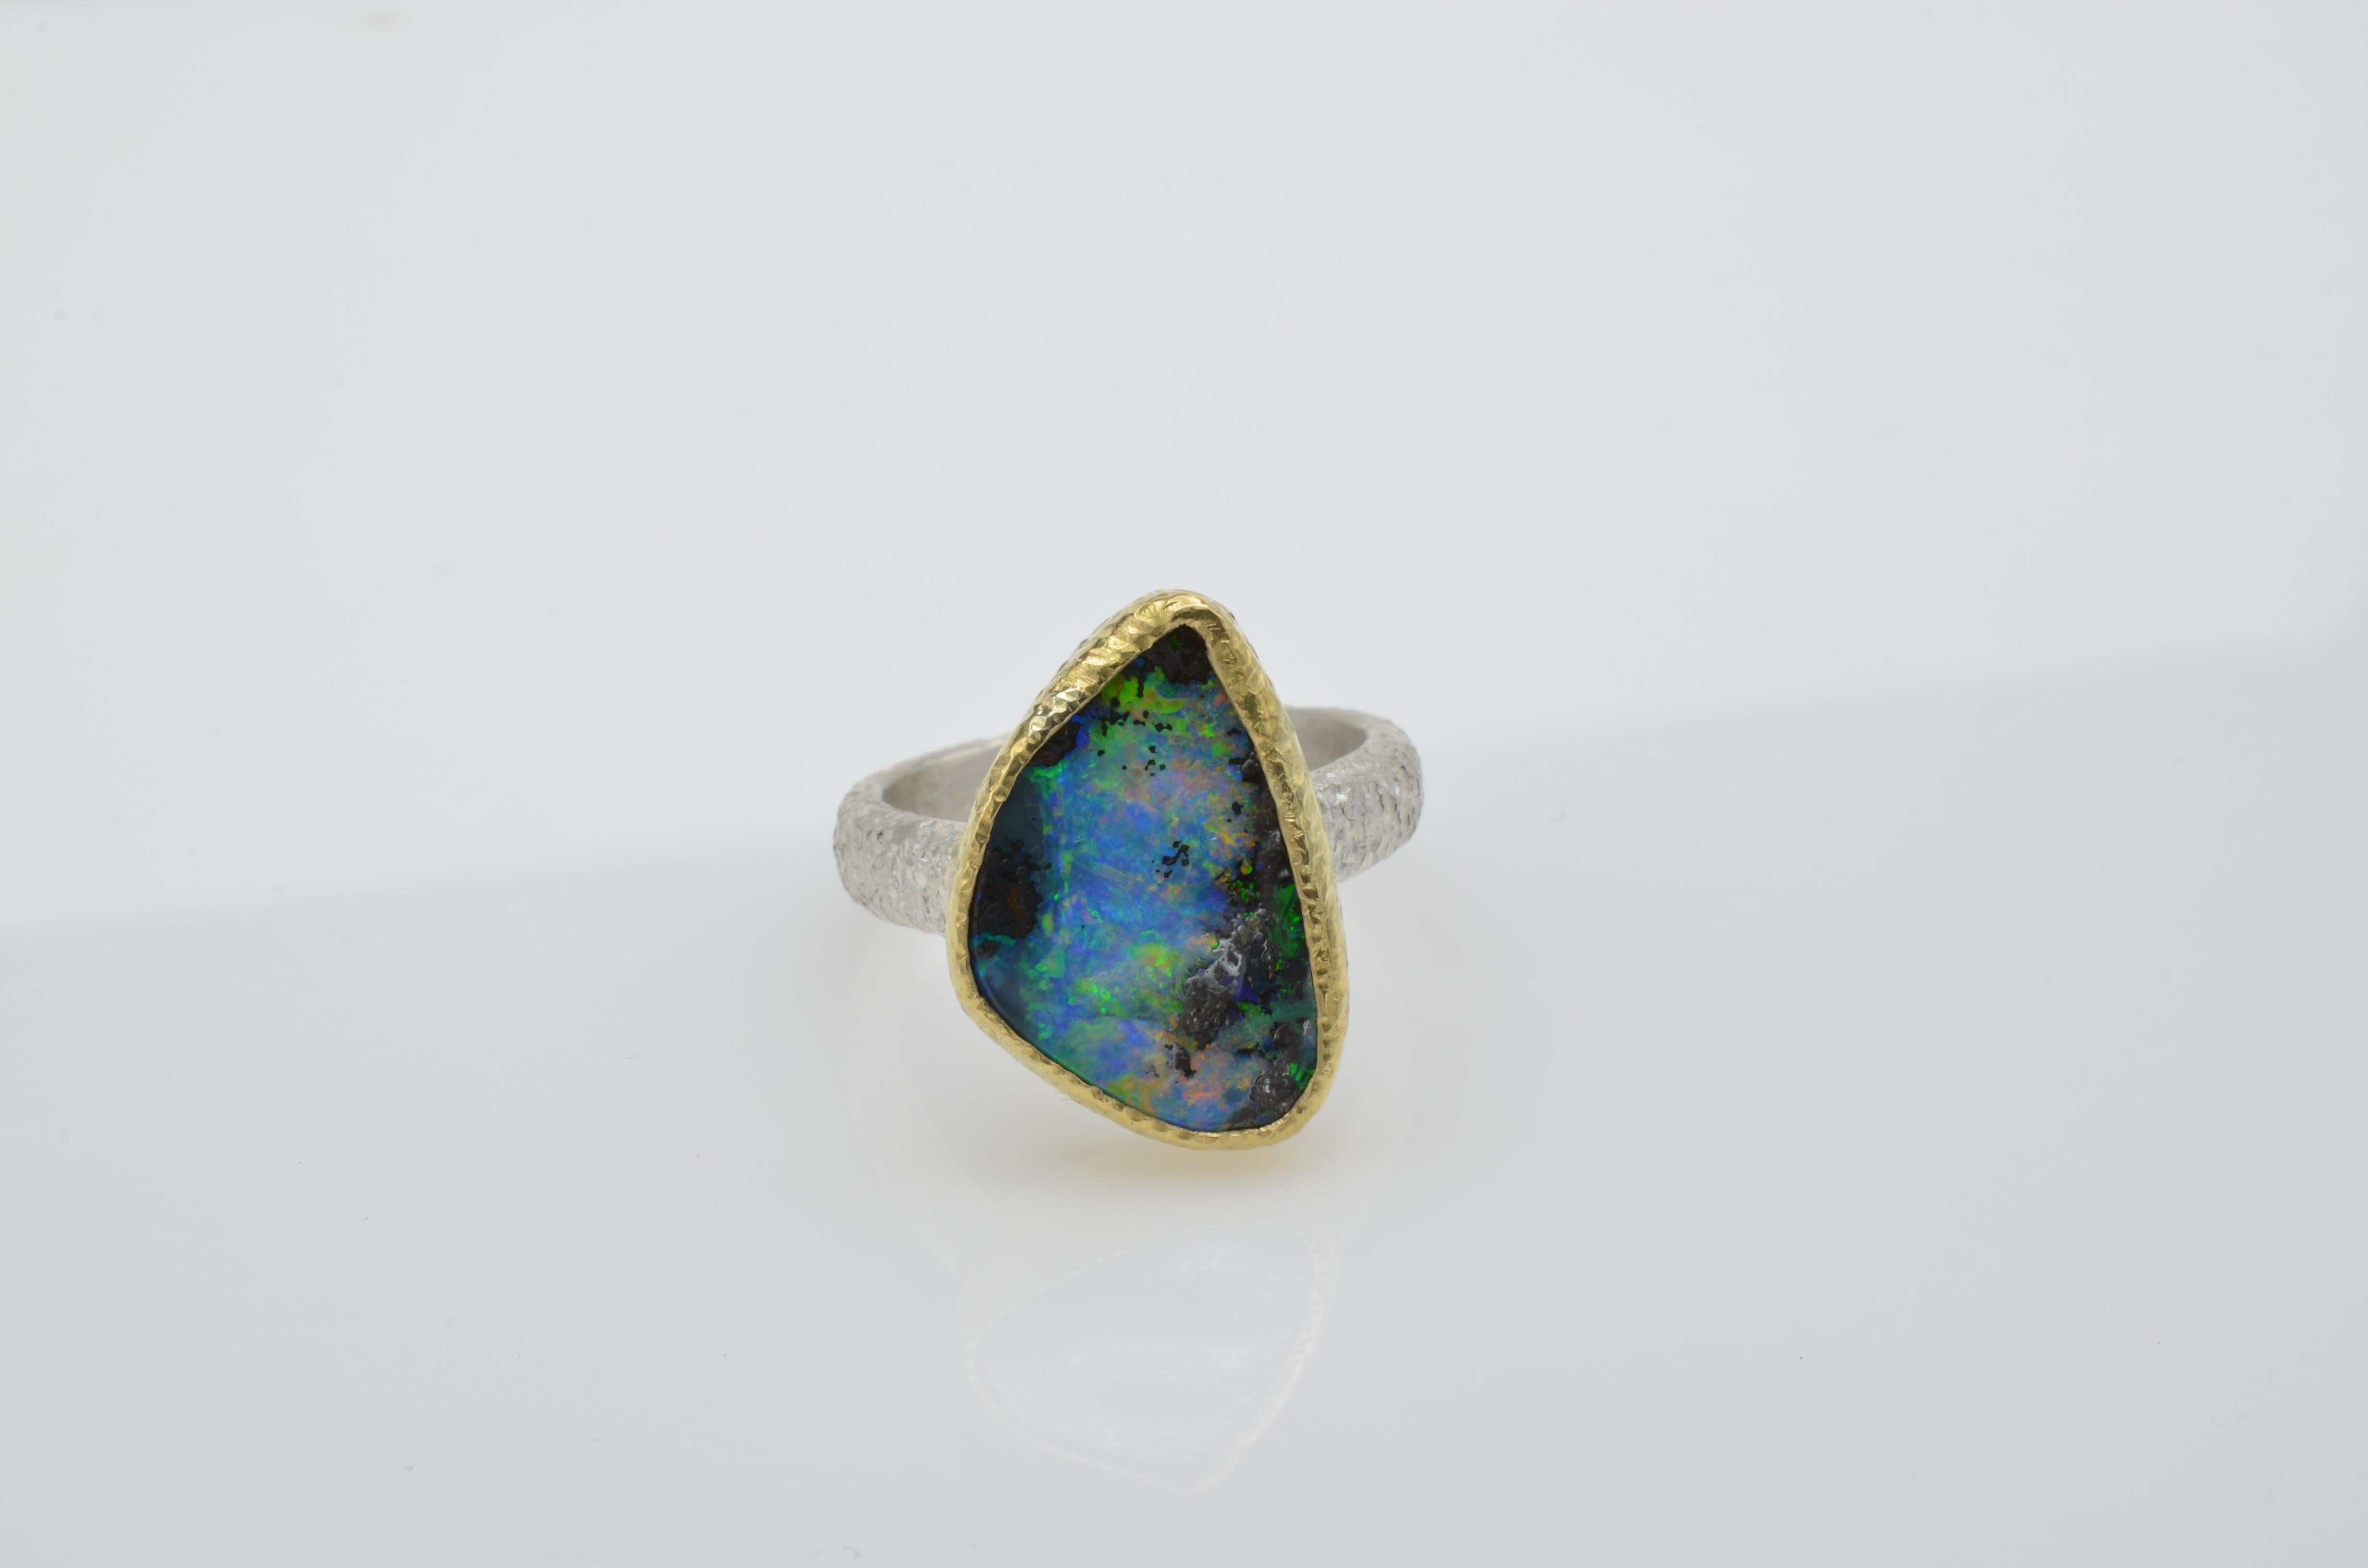 This magnificent boulder opal has incredible fire and color. The 14k gold bezel beautifully compliments the color of the stone.  The band is sterling silver and both have a handcrafted hammered texture. The ring size is a 7 and can be sized to fit